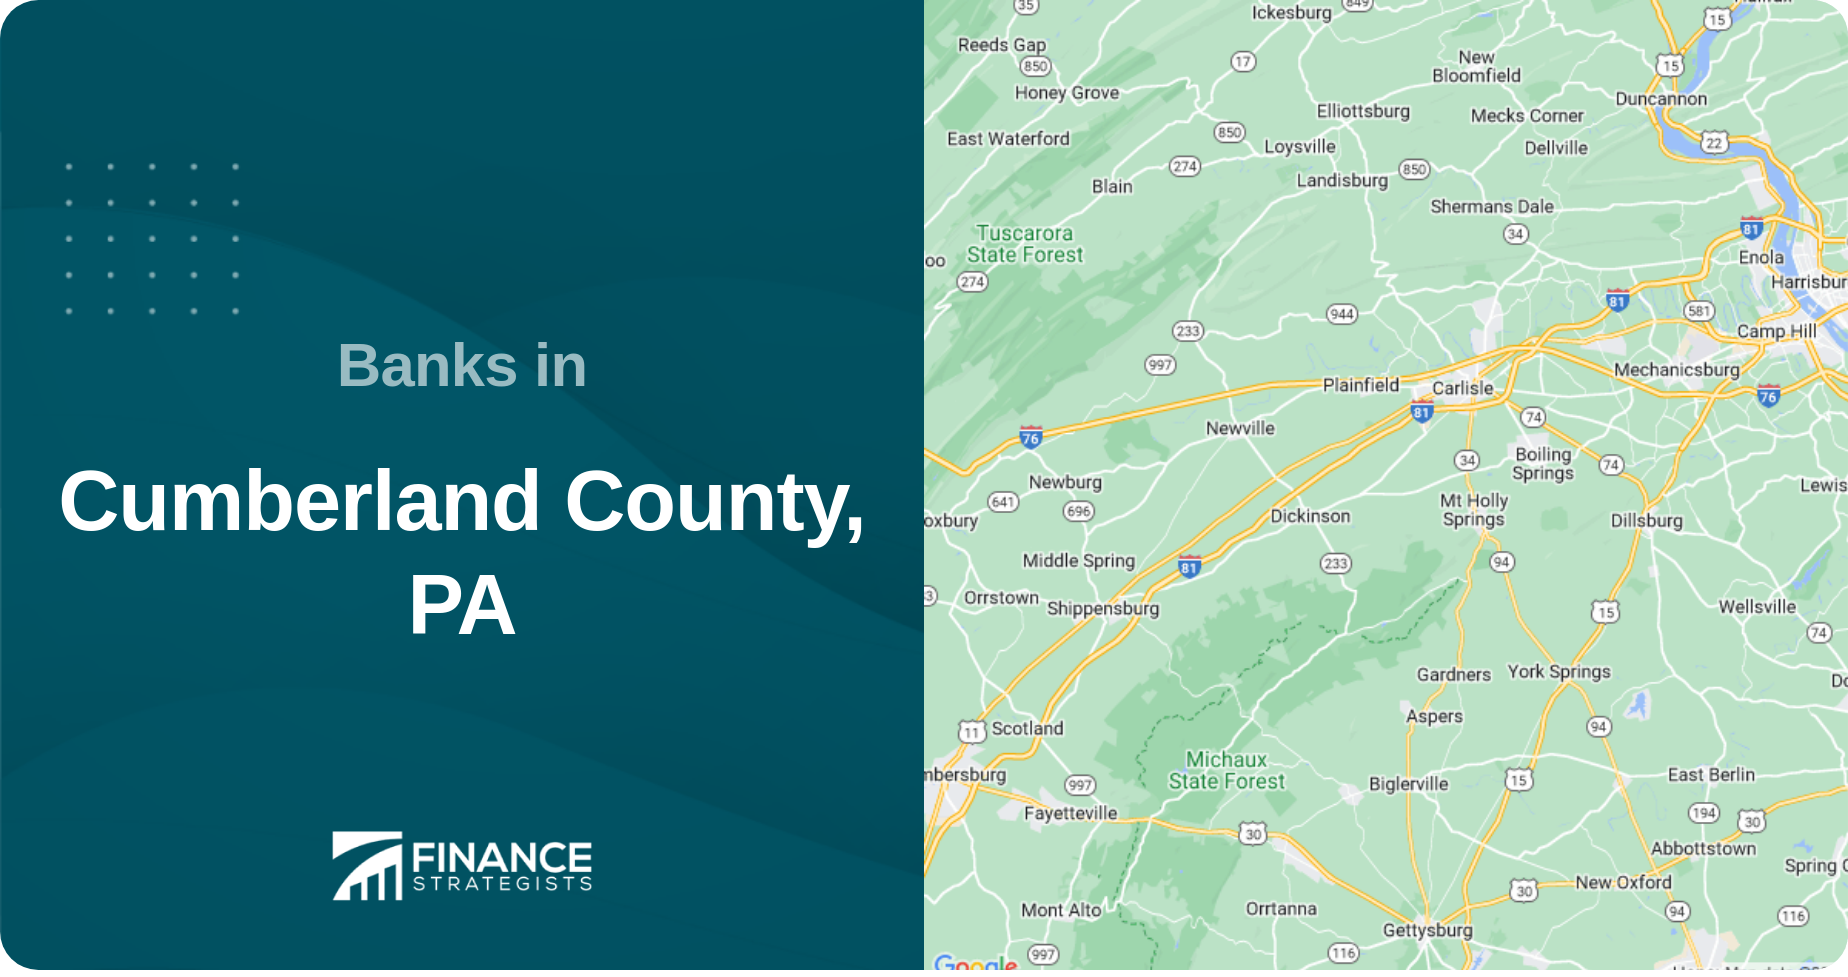 Banks in Cumberland County, PA